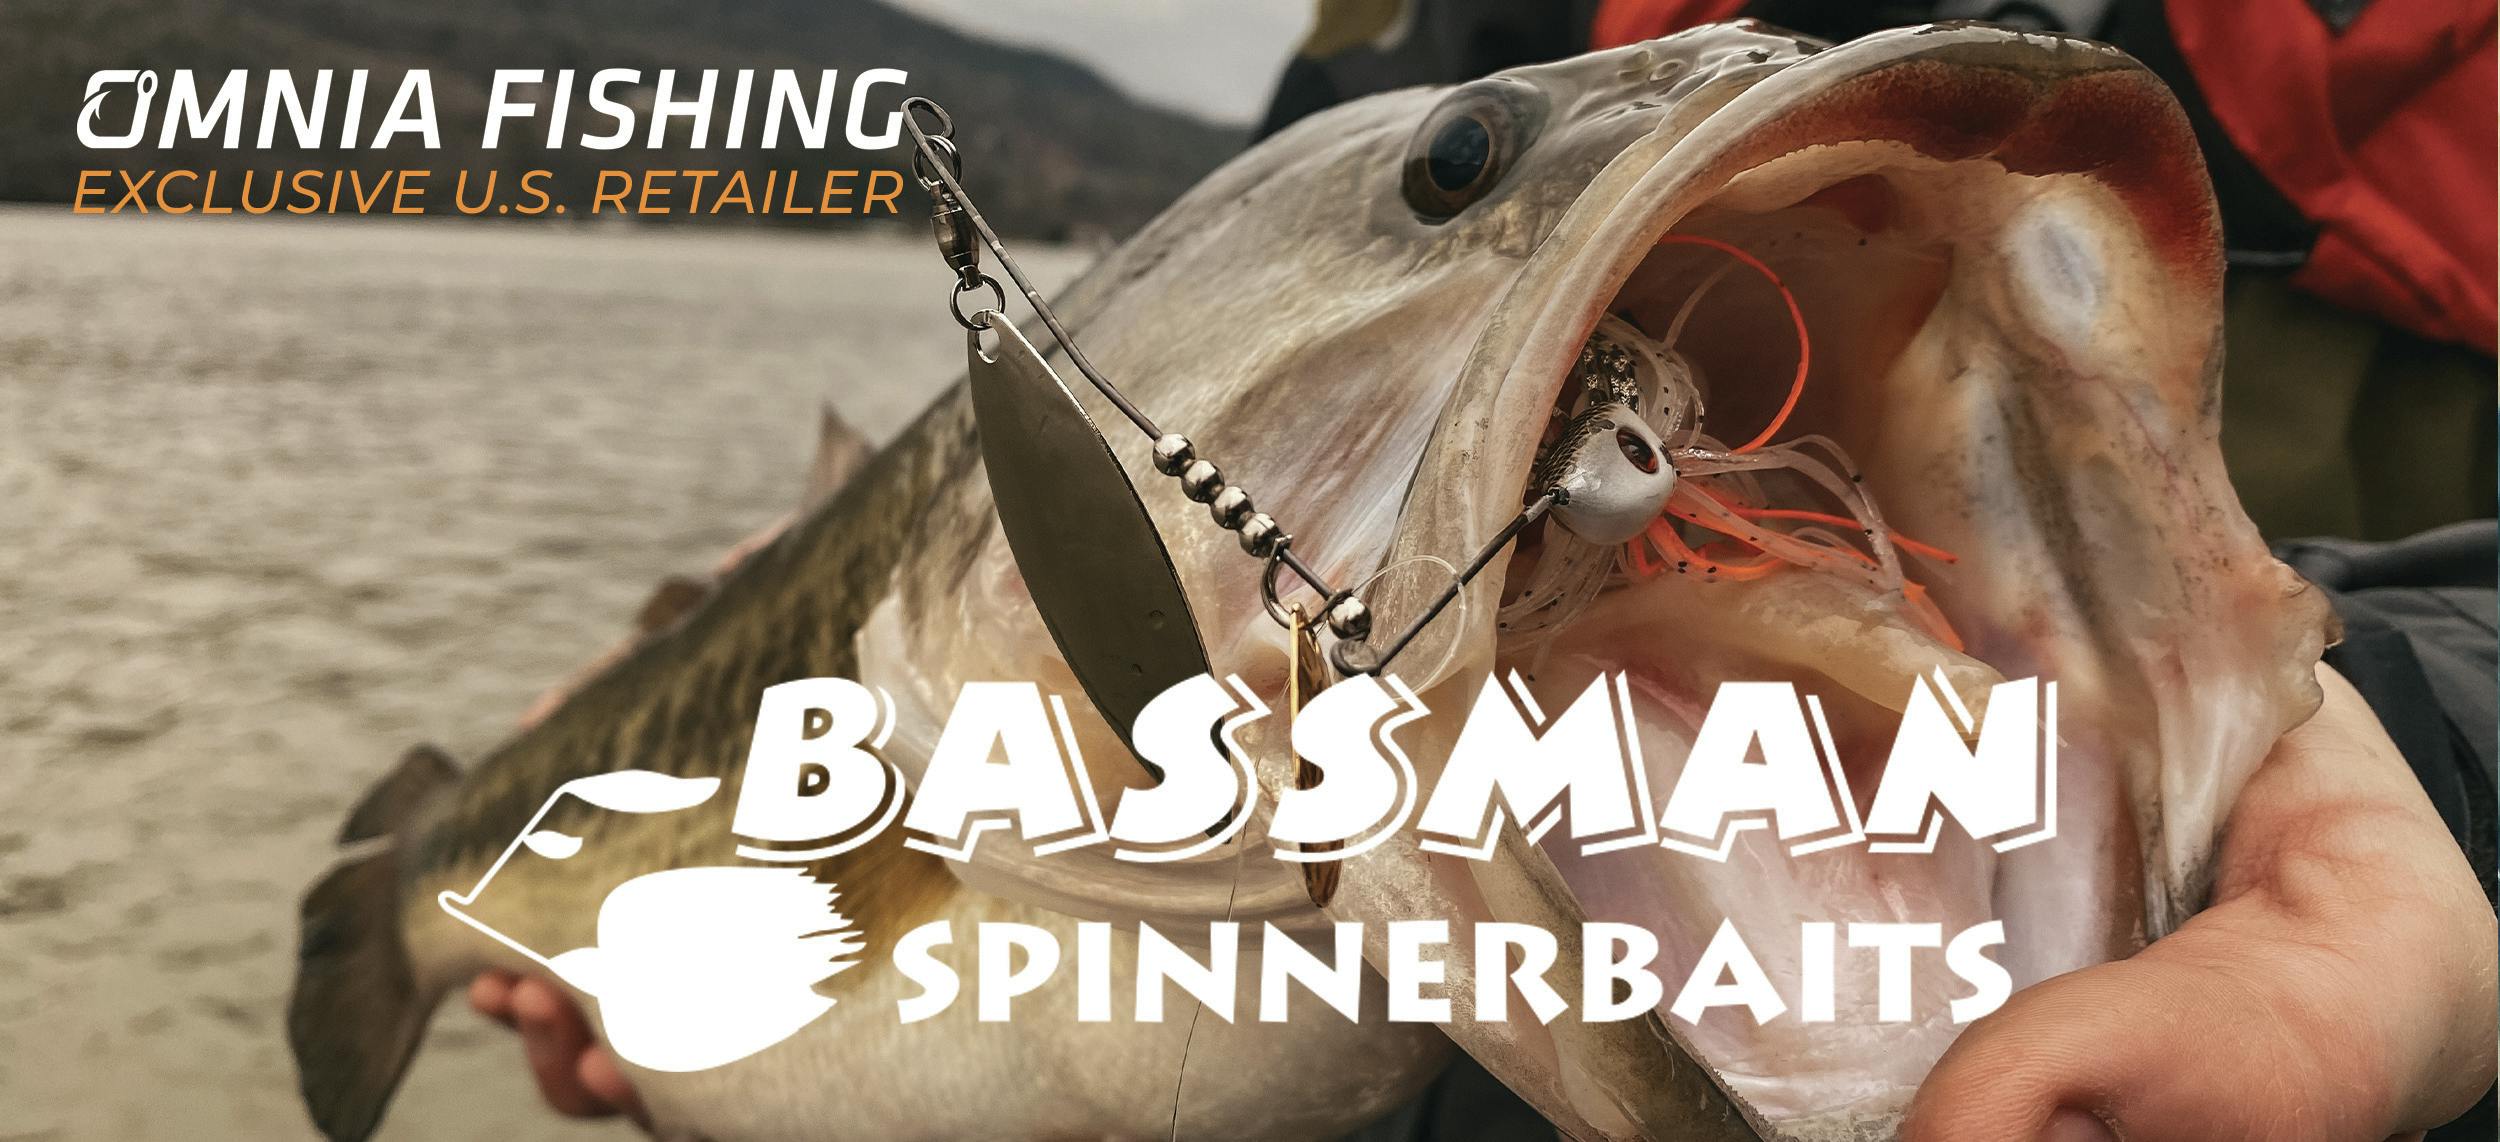 Omnia Fishing Become Exclusive US Retailer for Bassman